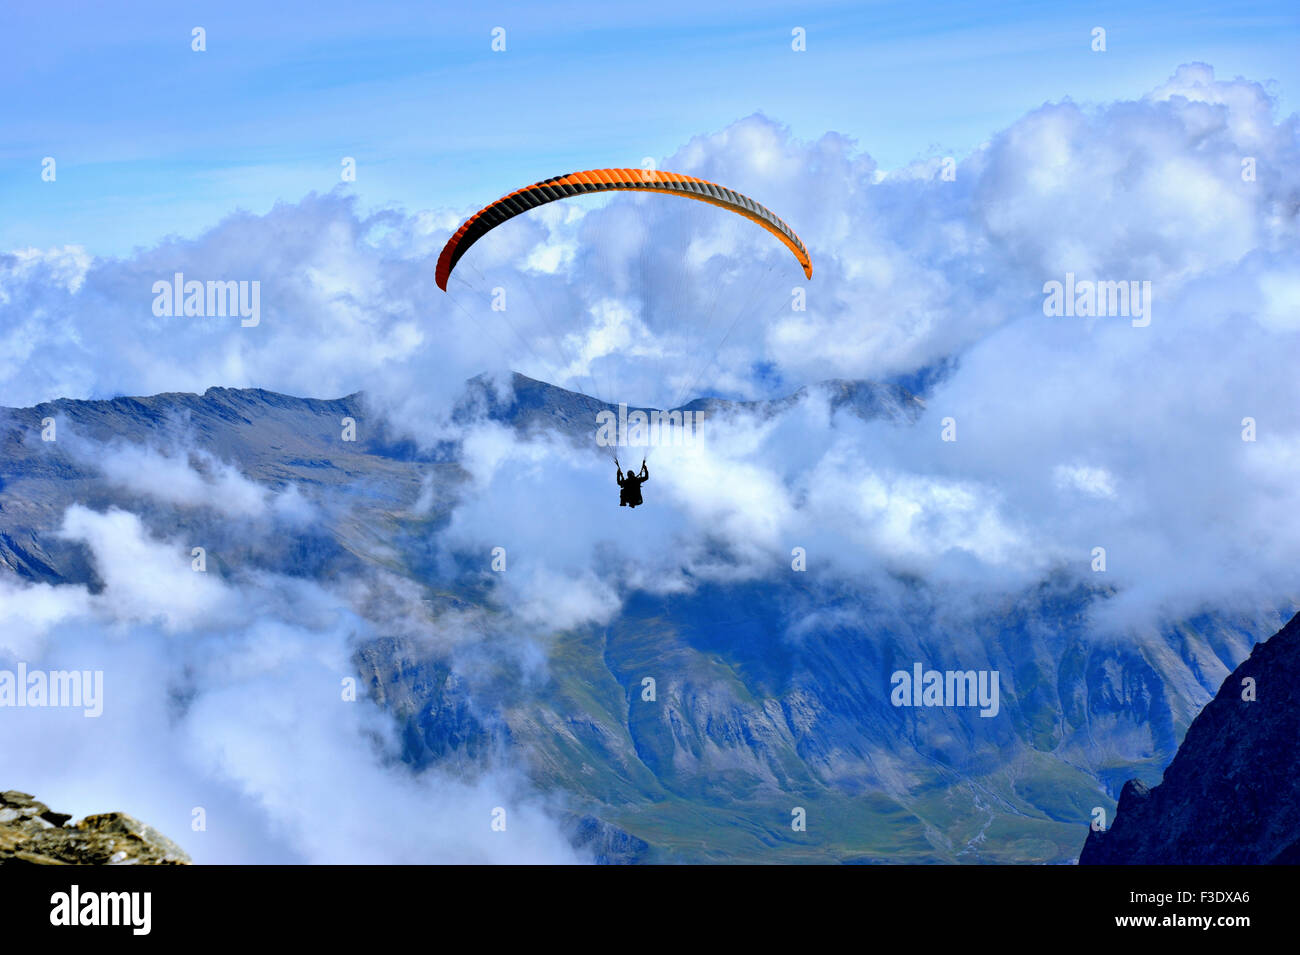 Parachuter starting jumps from mountain La Meije, French Alps, France Stock Photo